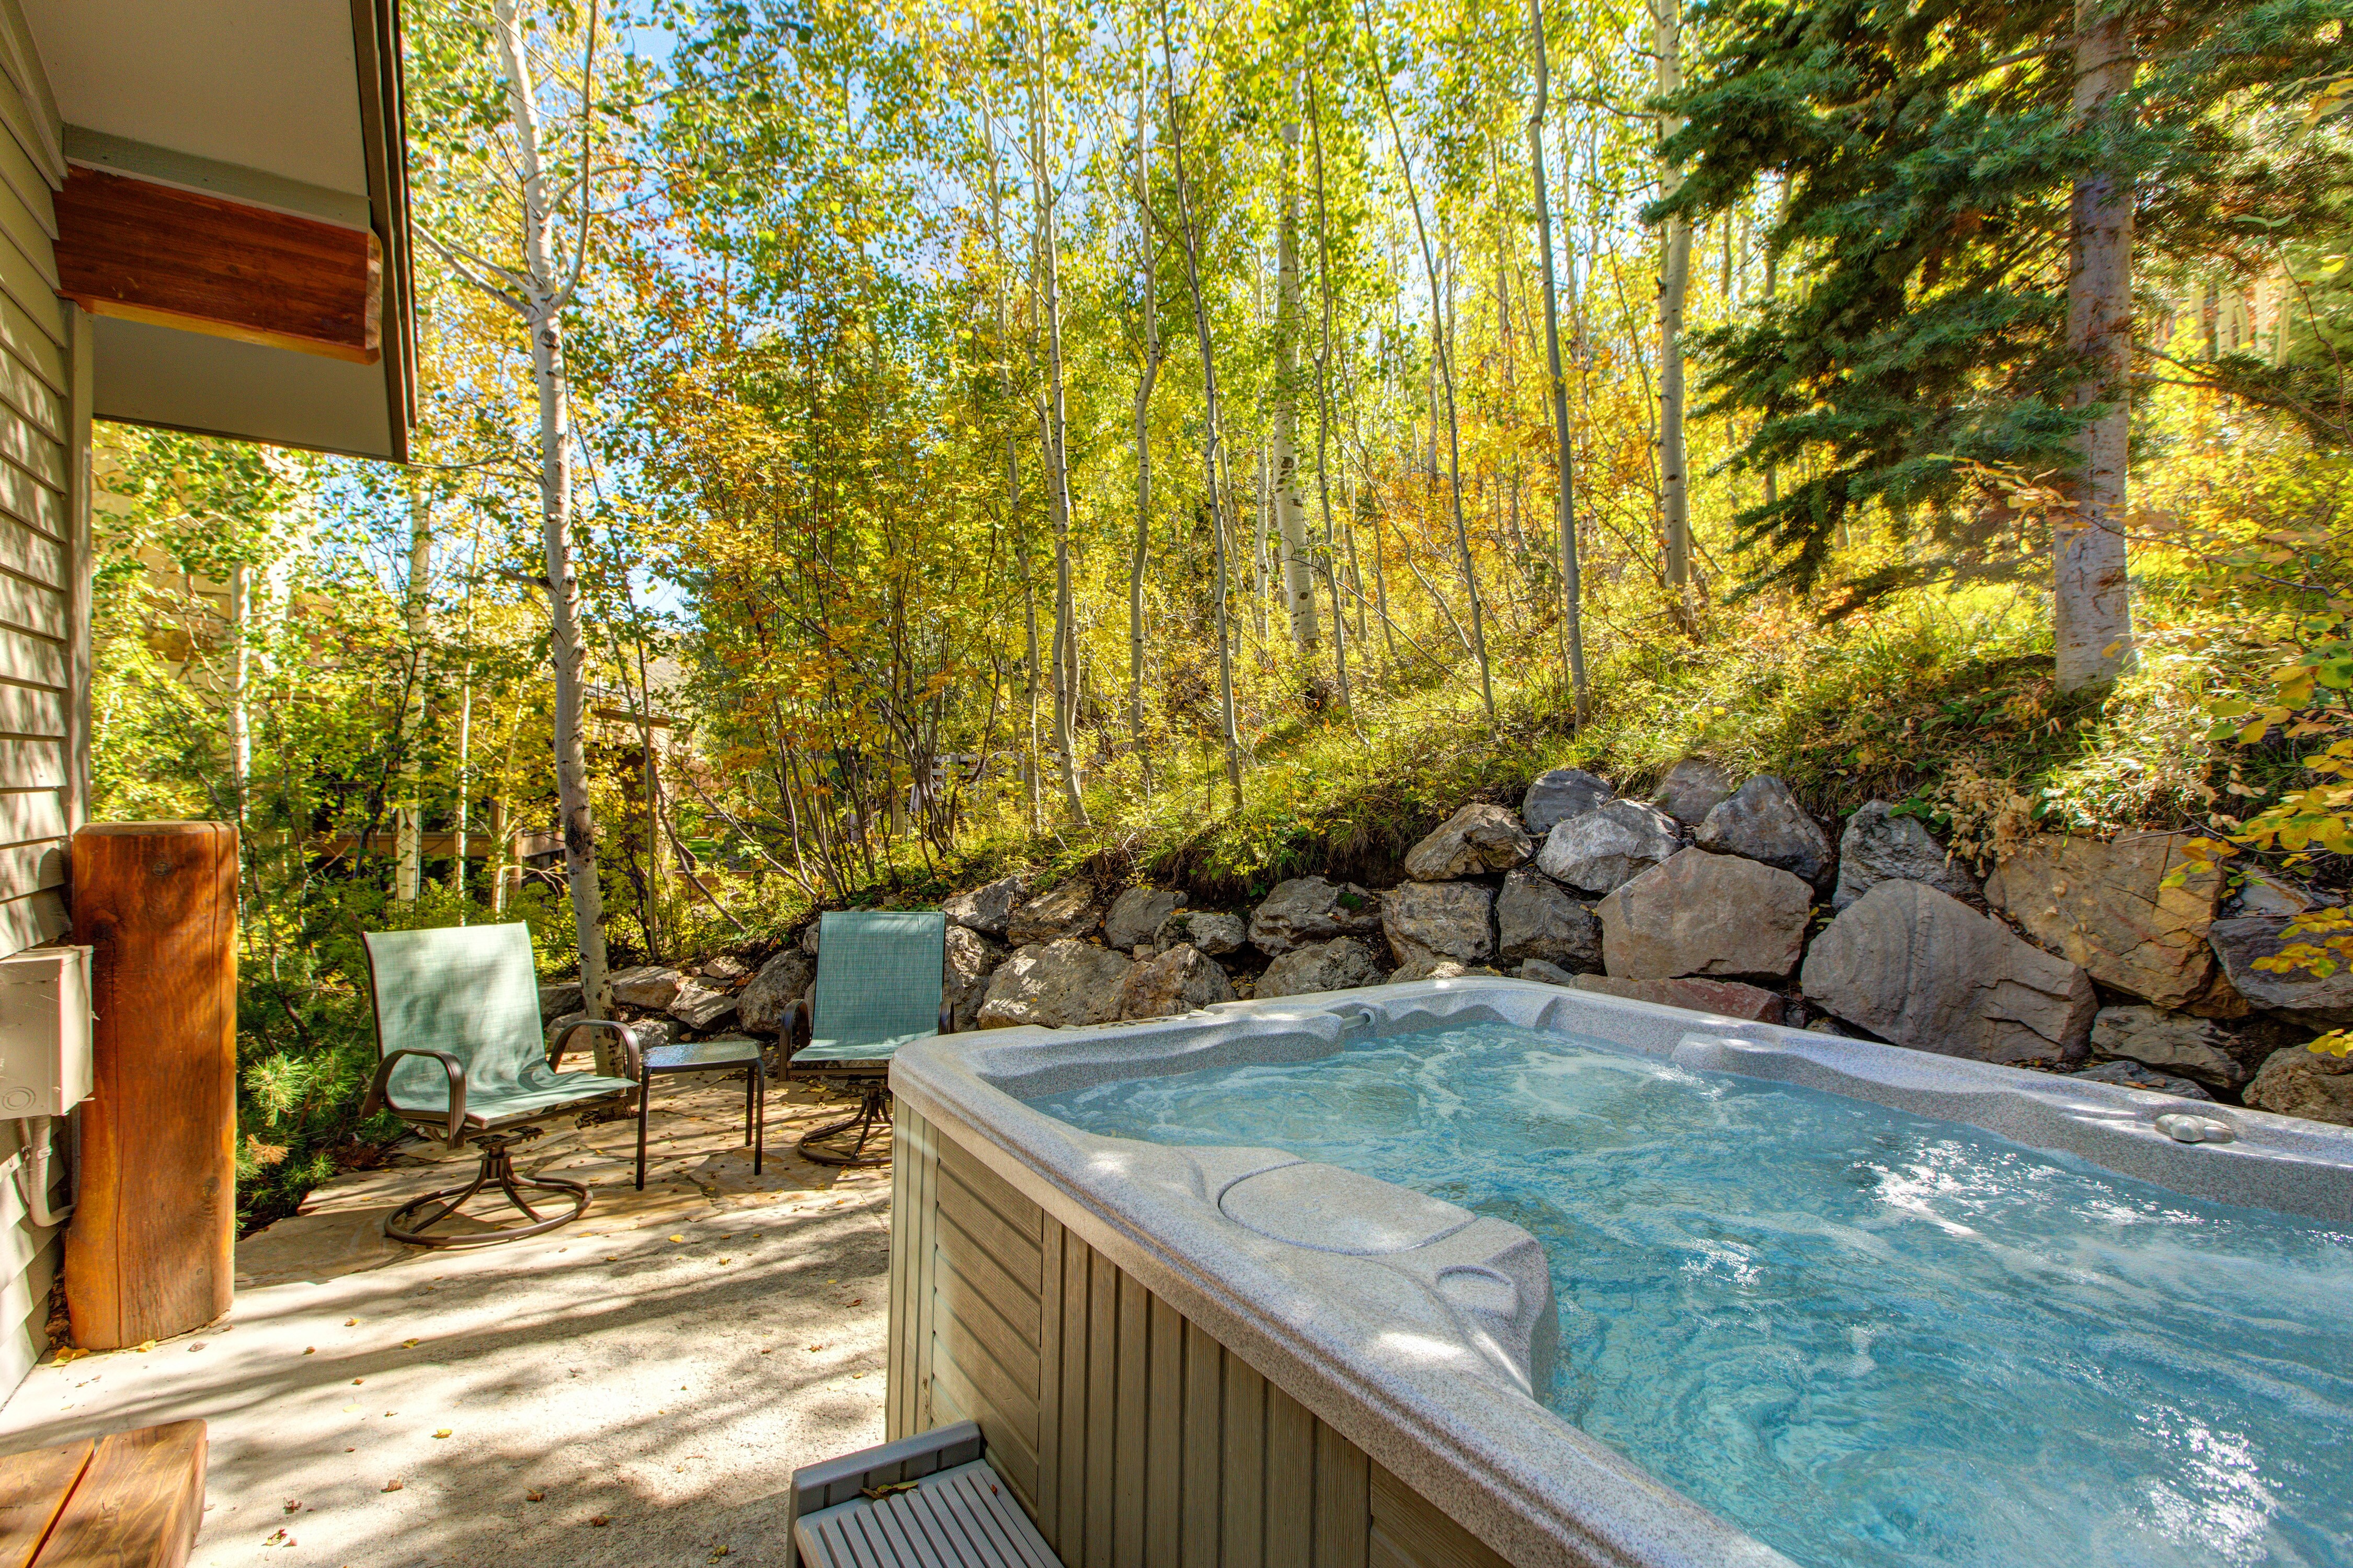 Private Patio with a Hot Tub Off the Upper Level Grand Master Bedroom - Beautiful Wooded Views